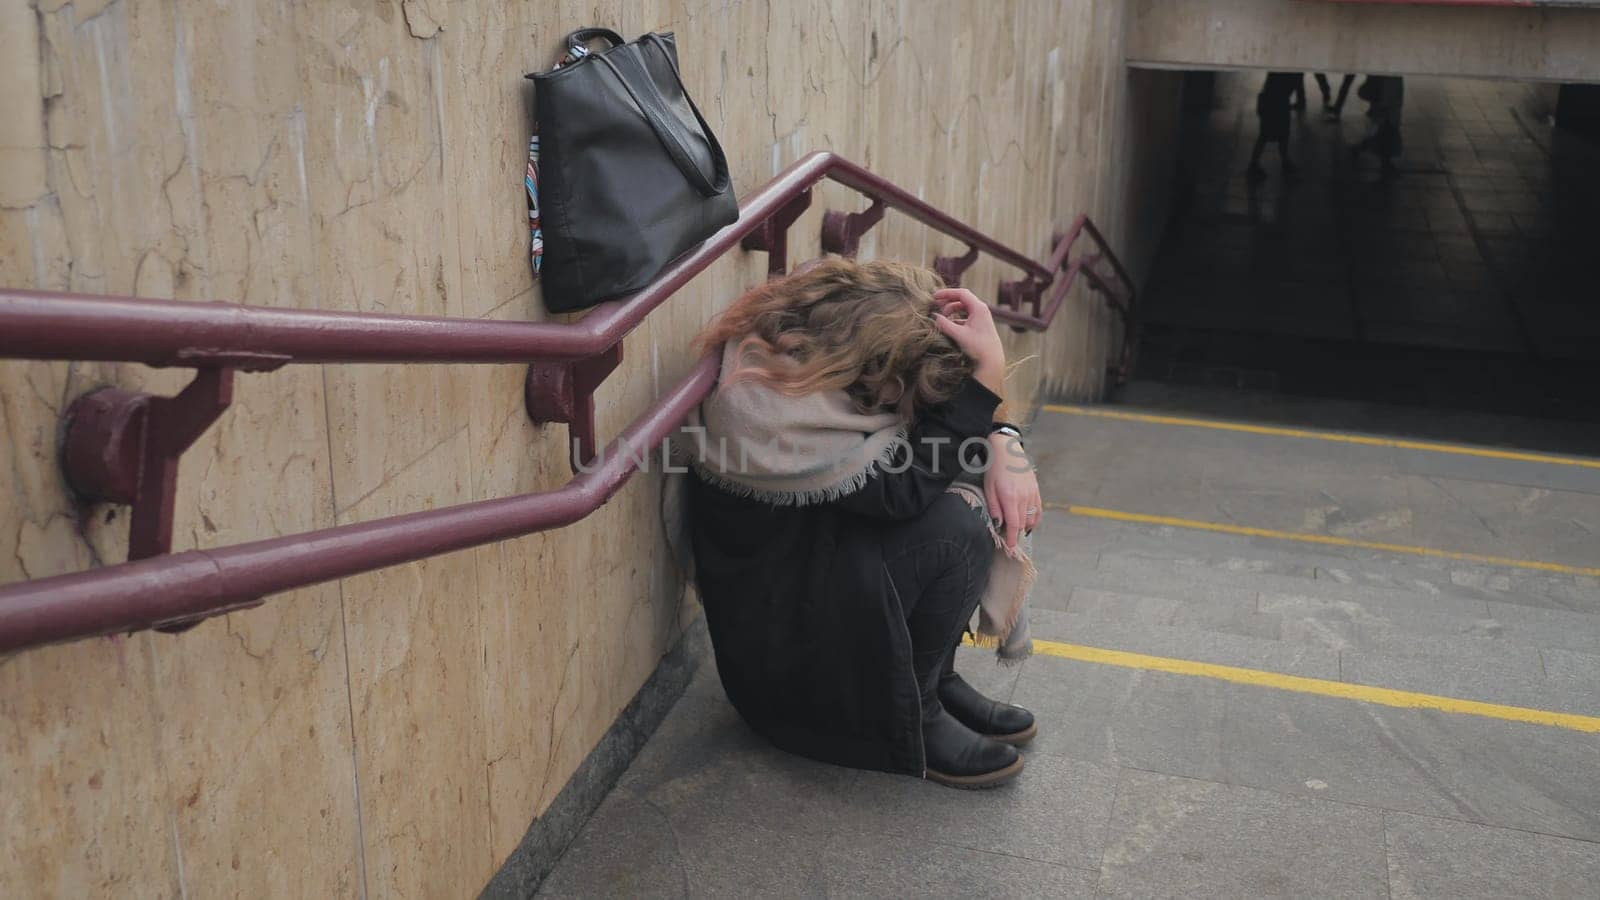 A young girl crying by the stairs in the subway. by DovidPro